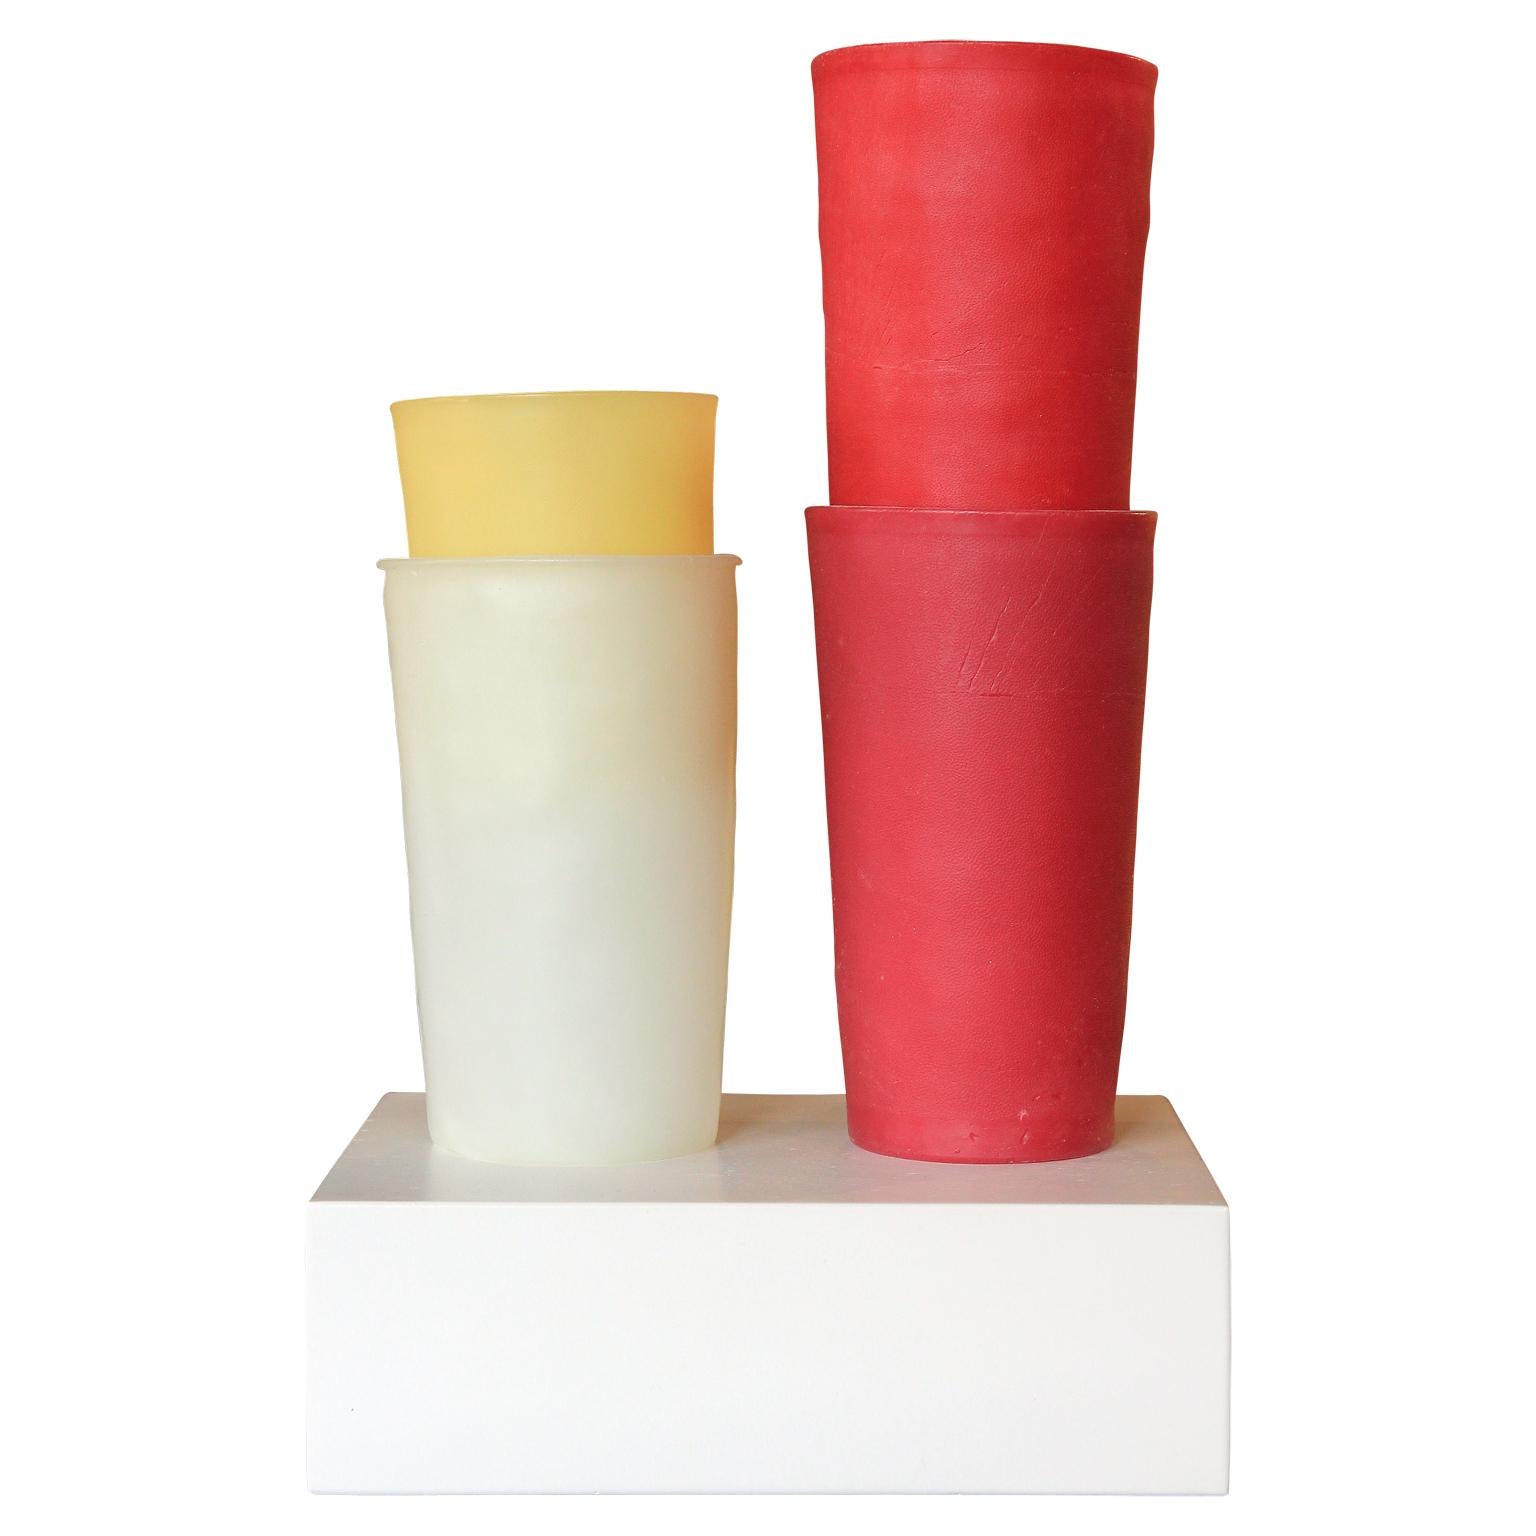 George Stoll Abstract Sculpture - "Untitled #2 (Tupperware)" Red, Yellow, & White Realistic Beeswax Cup Sculpture